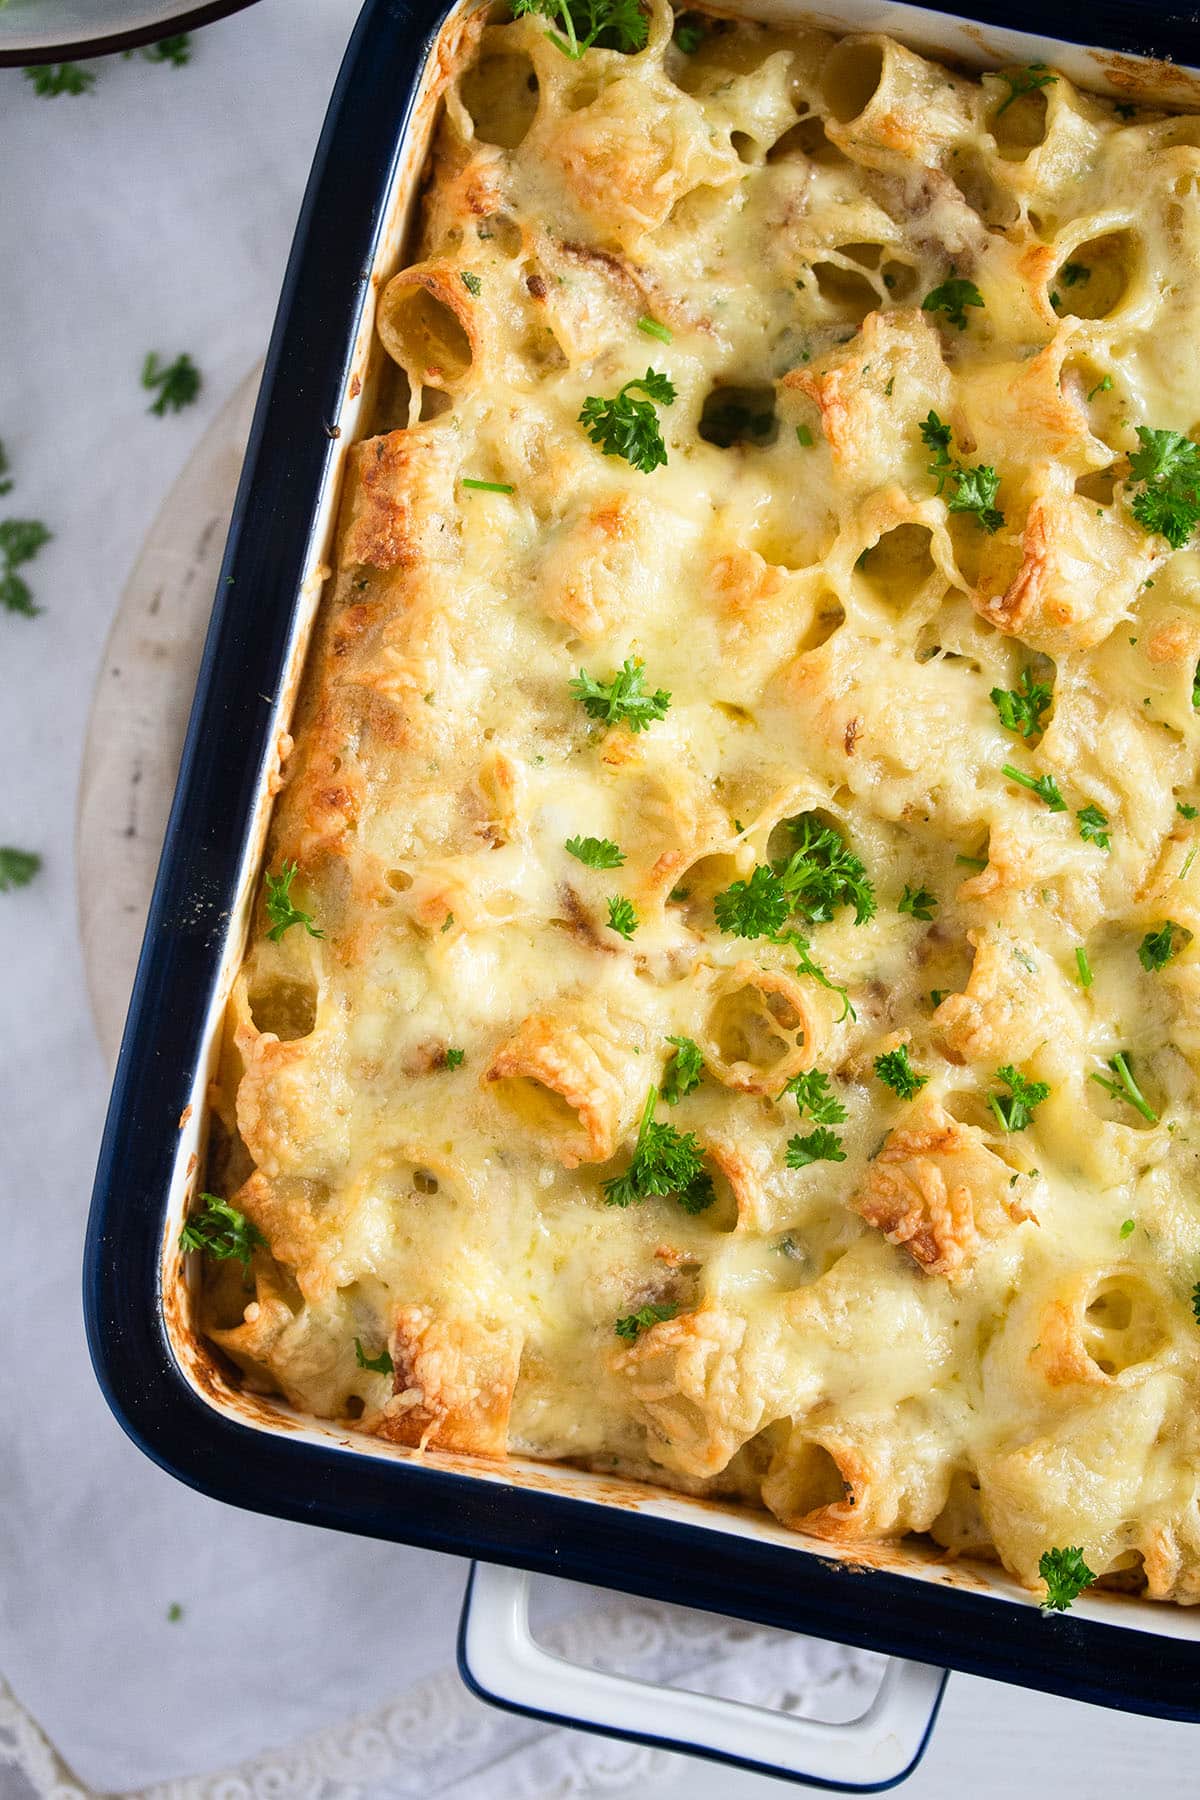 pasta turkey bake in a casserole dish sprinkled with parsley.